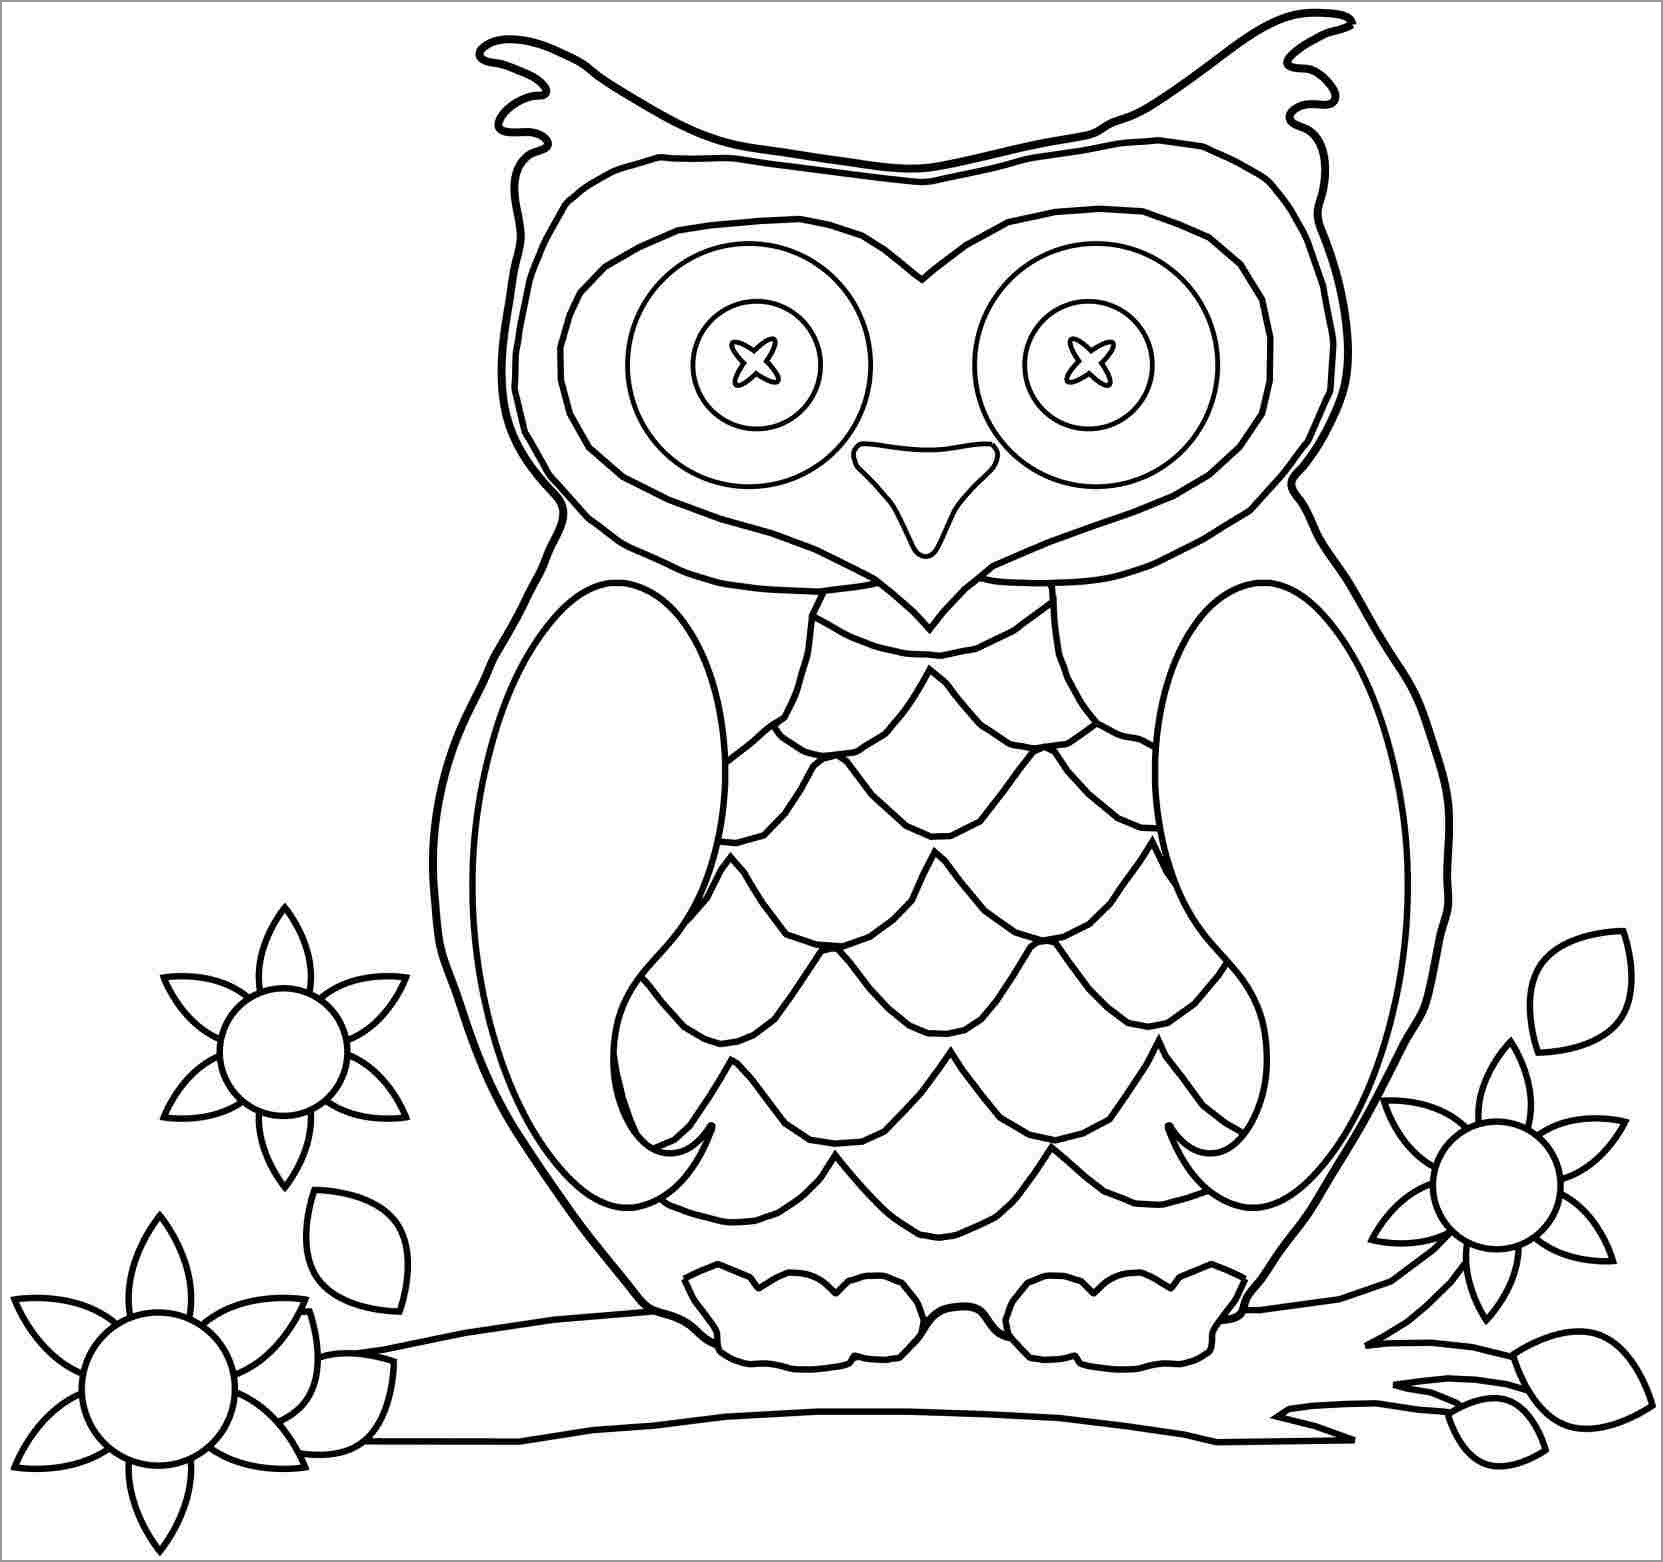 Easy Cute Owl Coloring Pages